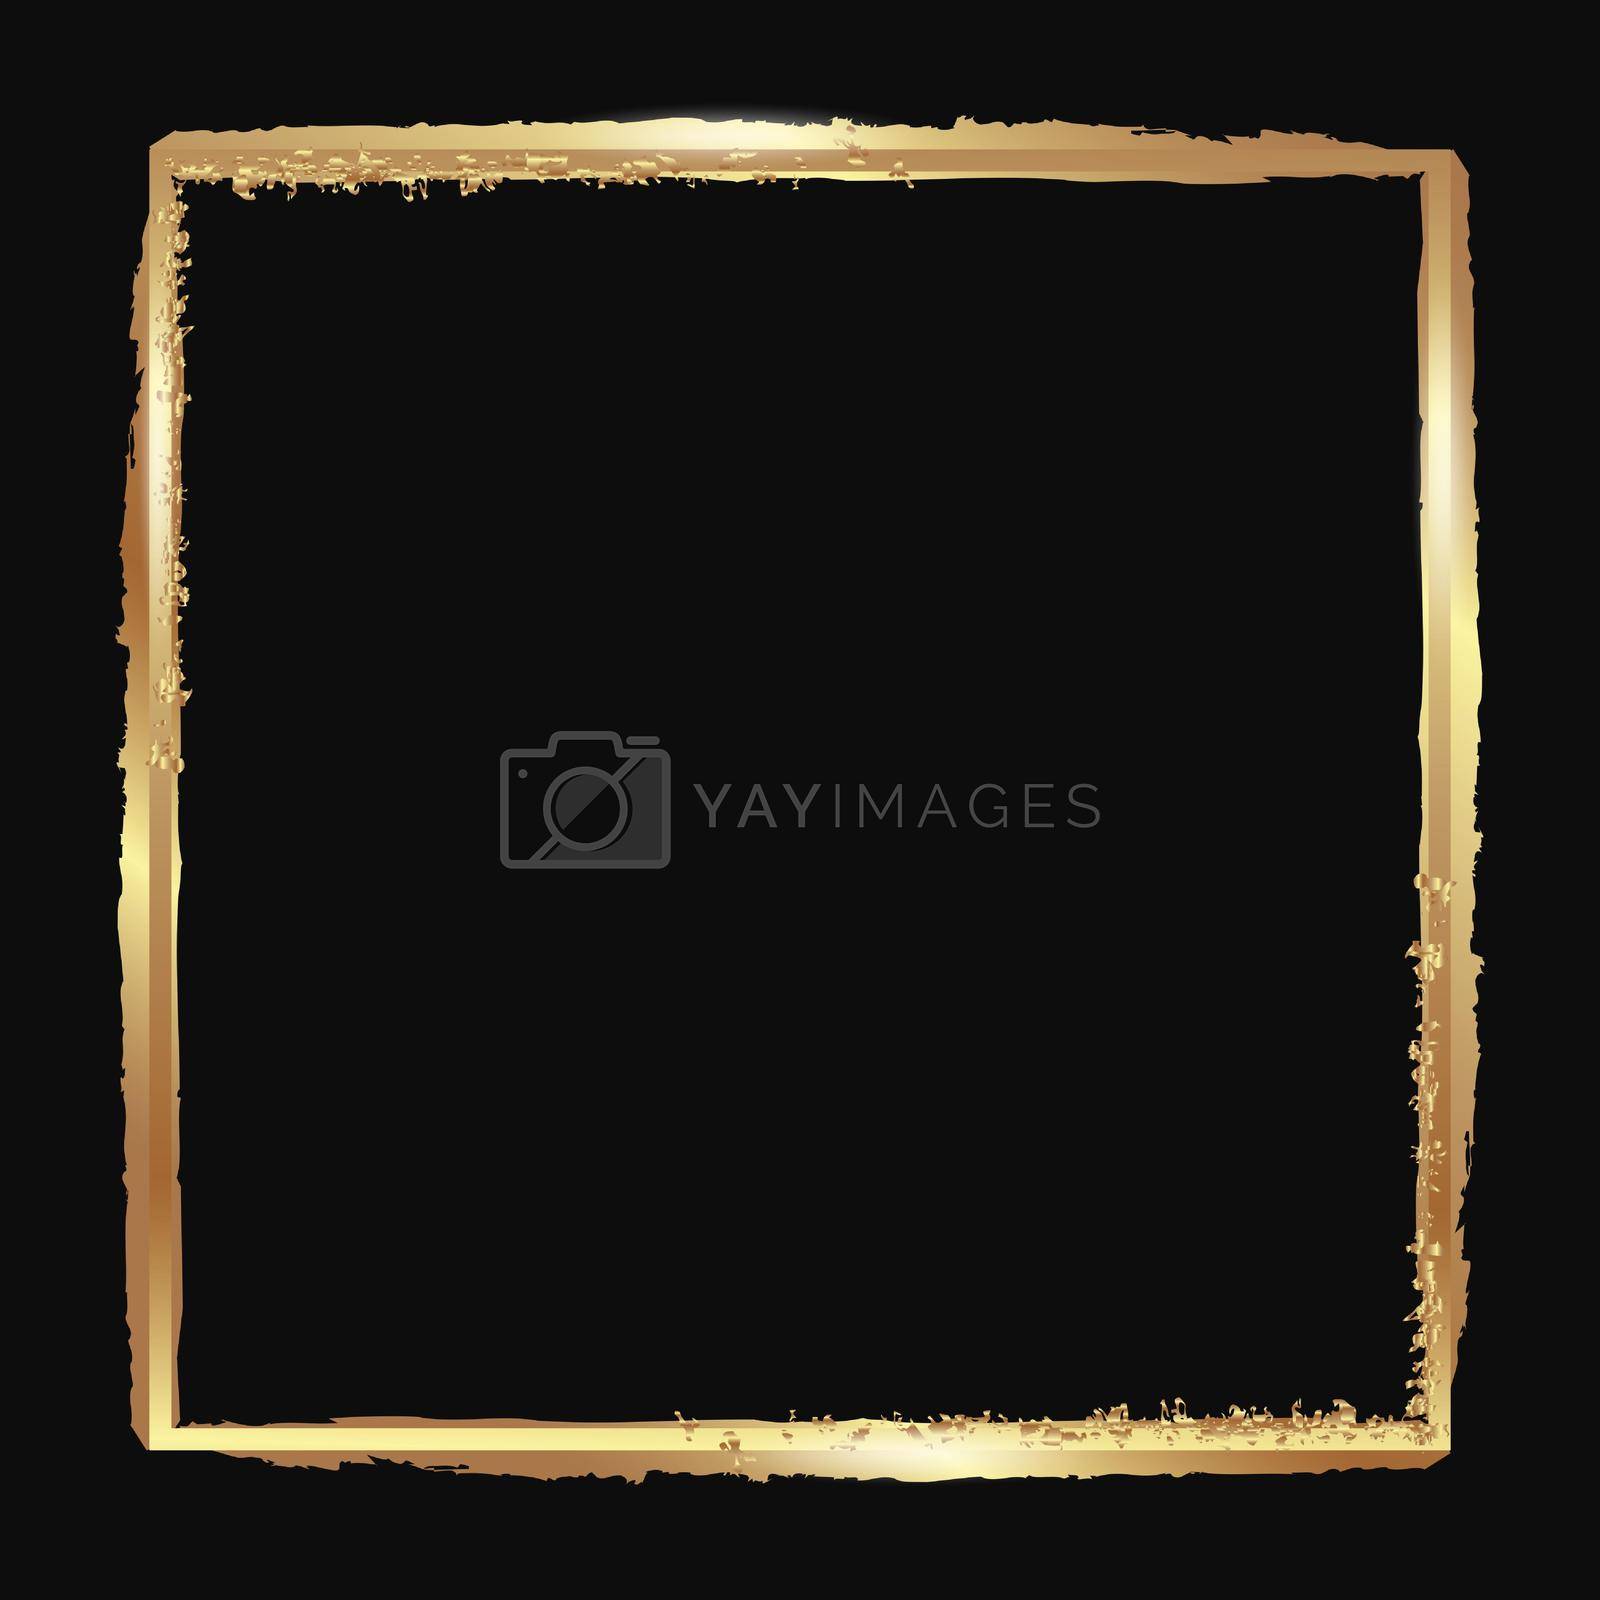 Royalty free image of Gold or copper square frame by Mallva